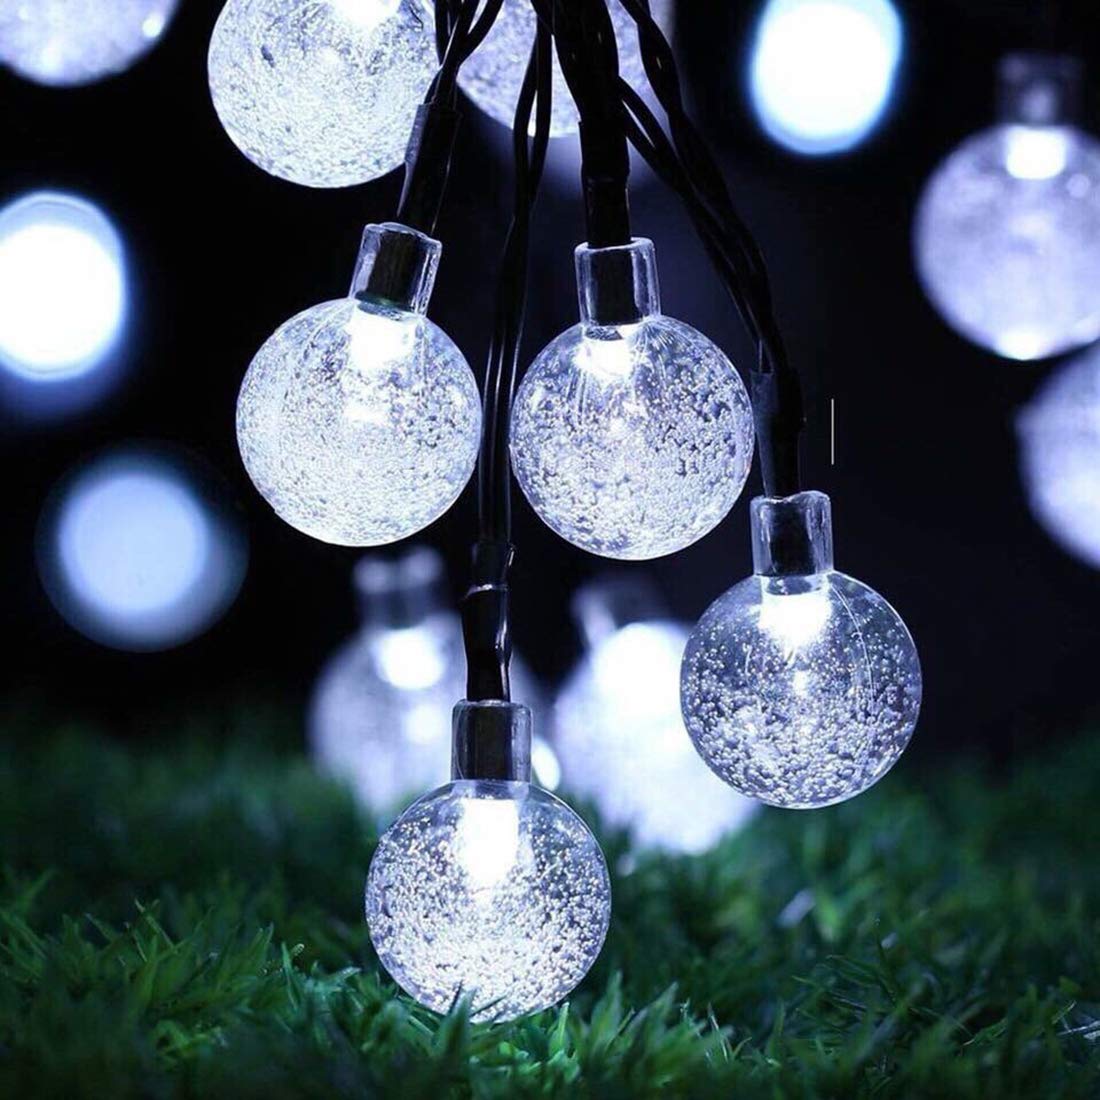 Solar String Lights Outdoor, 24Ft 50 LED Garden Solar Lights Waterproof Crystal Globe Outdoor/Indoor Fairy Lights Decorative Lighting for Home, Garden, Party, Christmas, Festival (Clear White)